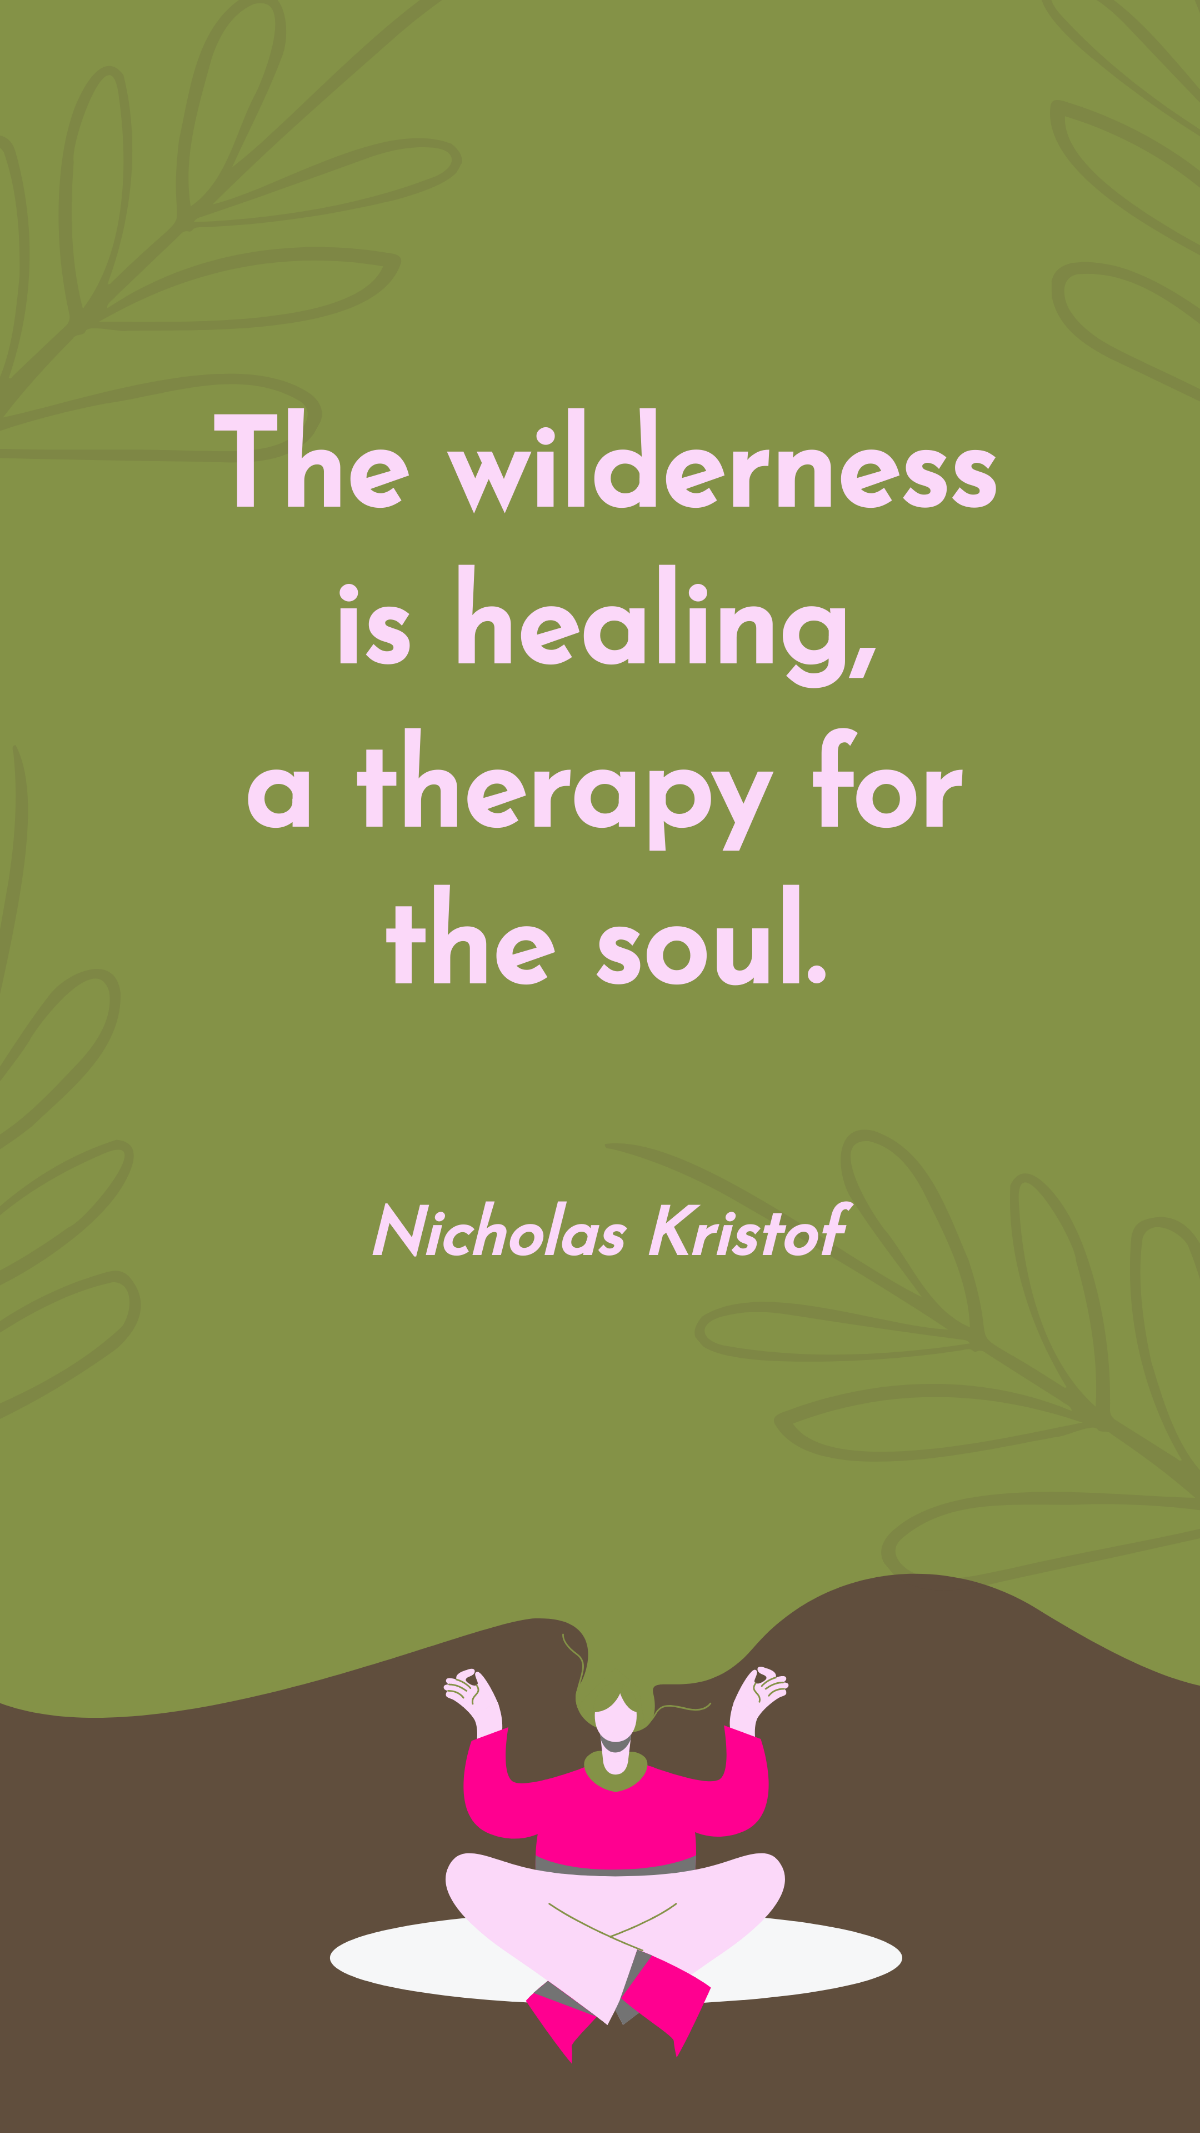 Nicholas Kristof - The wilderness is healing, a therapy for the soul.